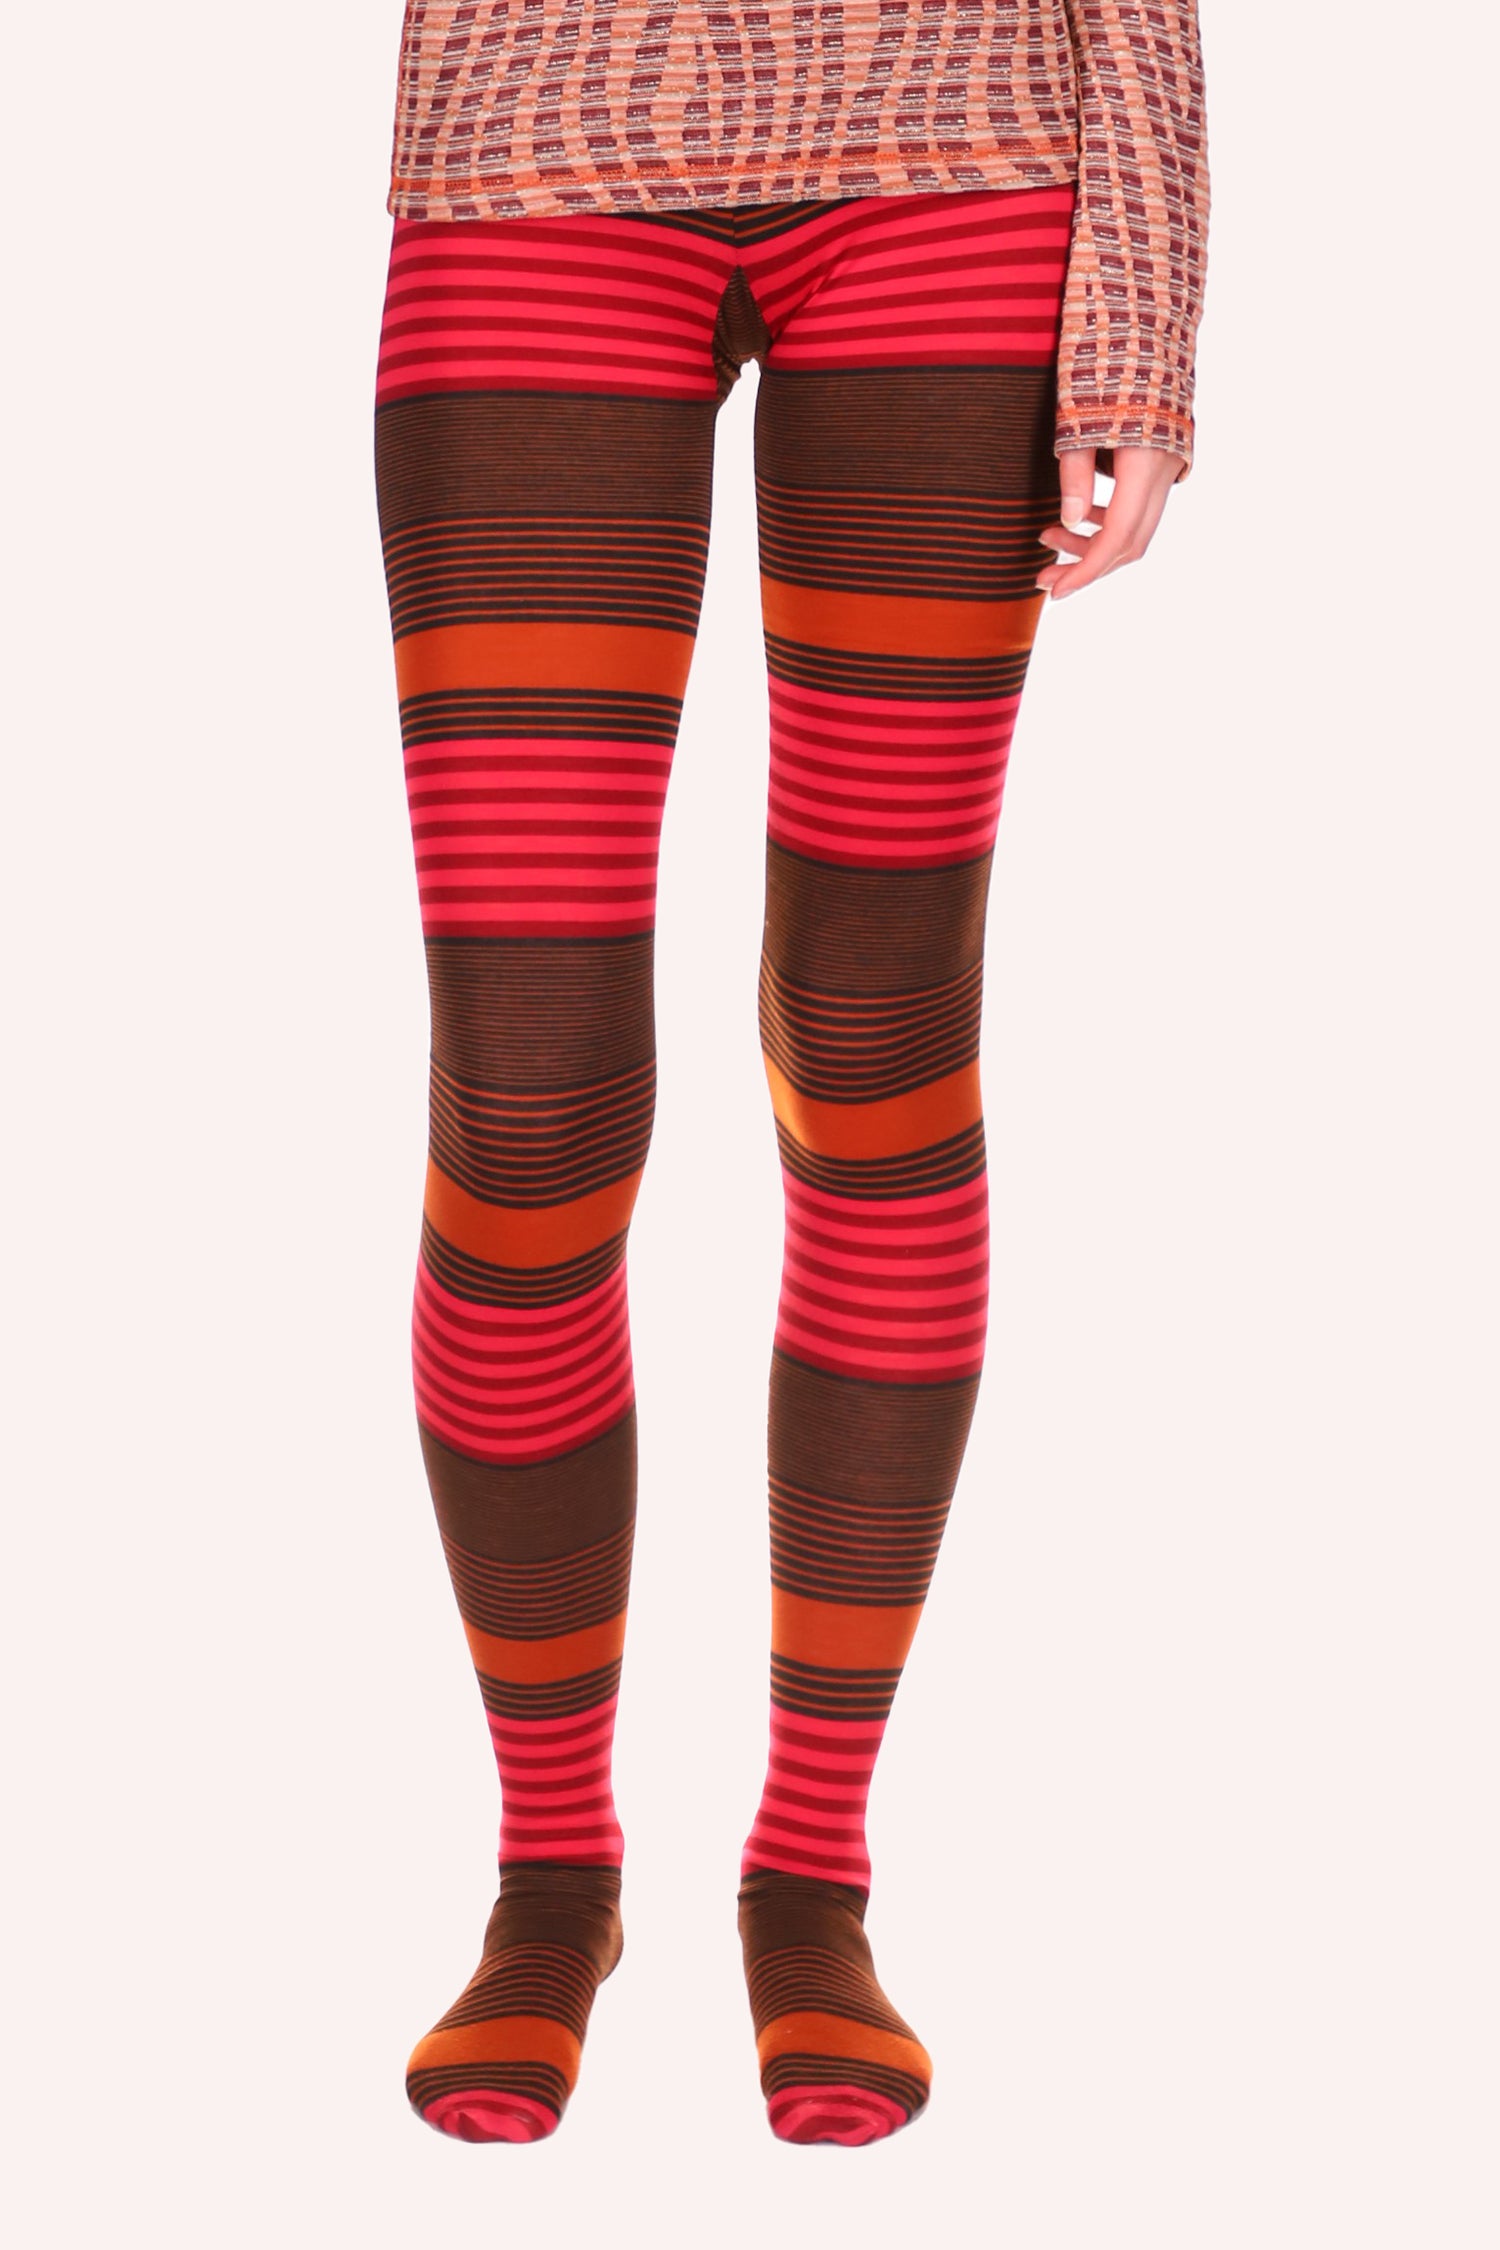 Mod Stripe Knit Tights, different sizes of bands orange hue, pink, red, and brown around the legs